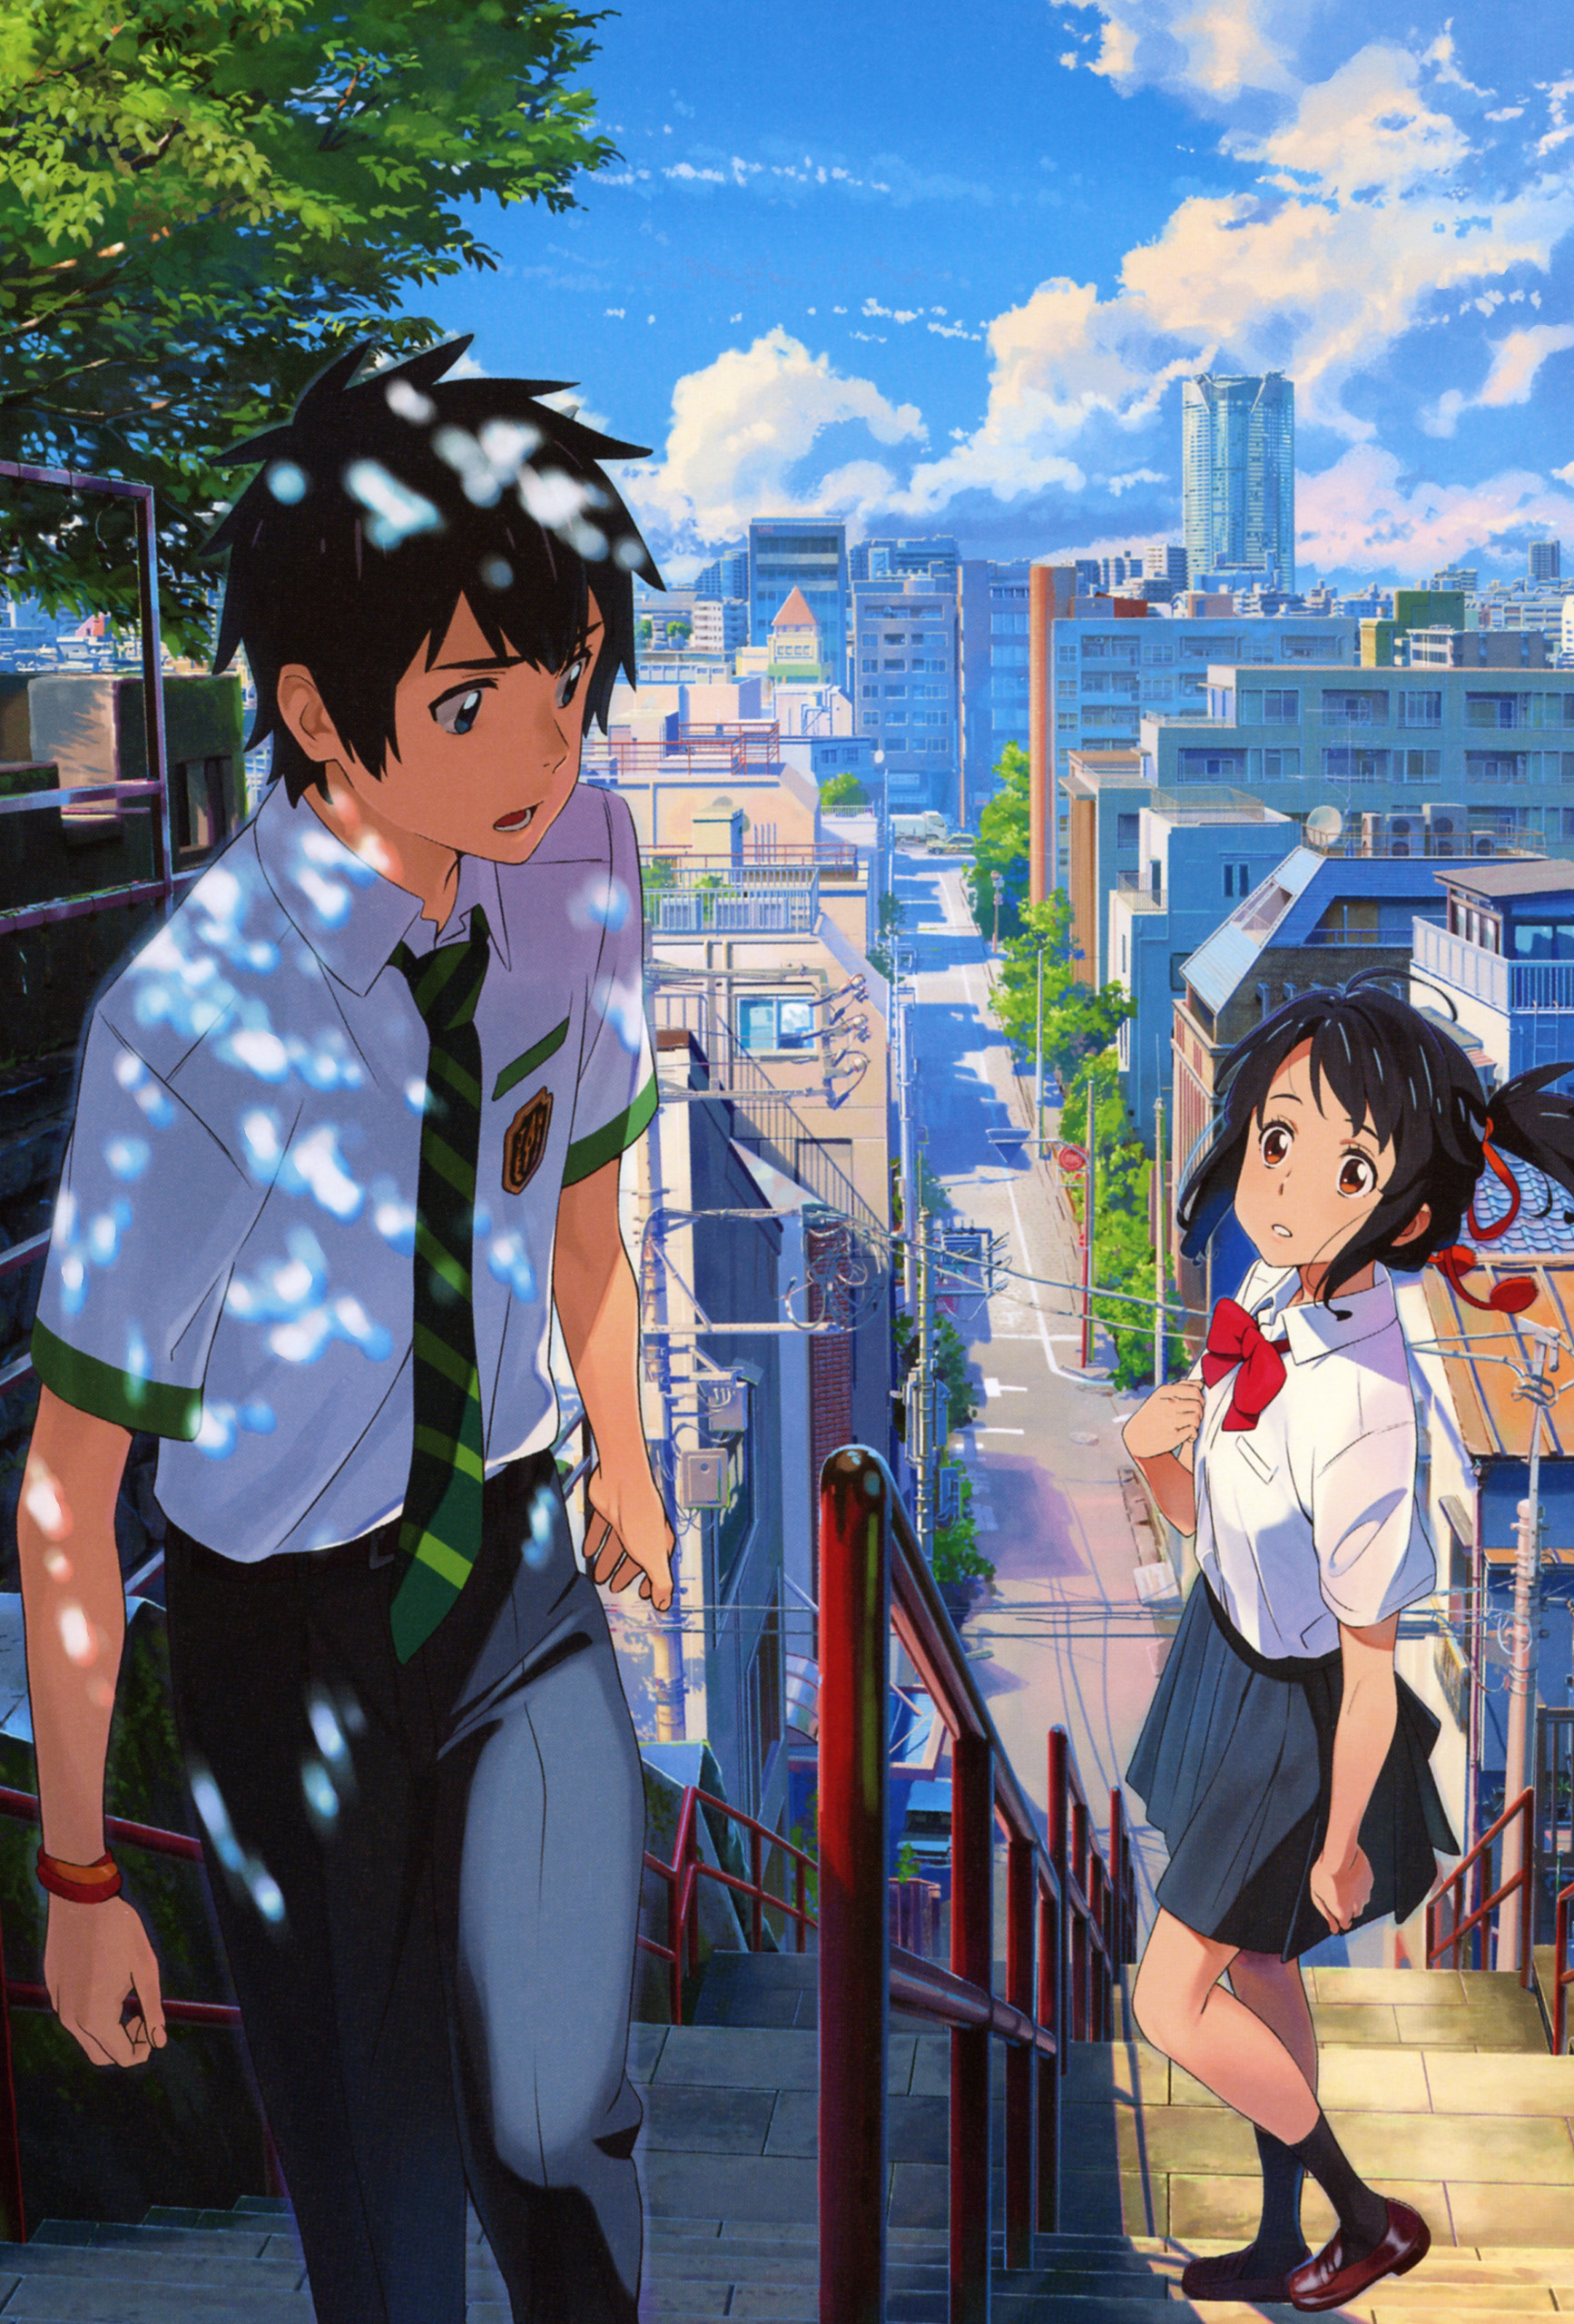 Your Name Anime Movie of the Year